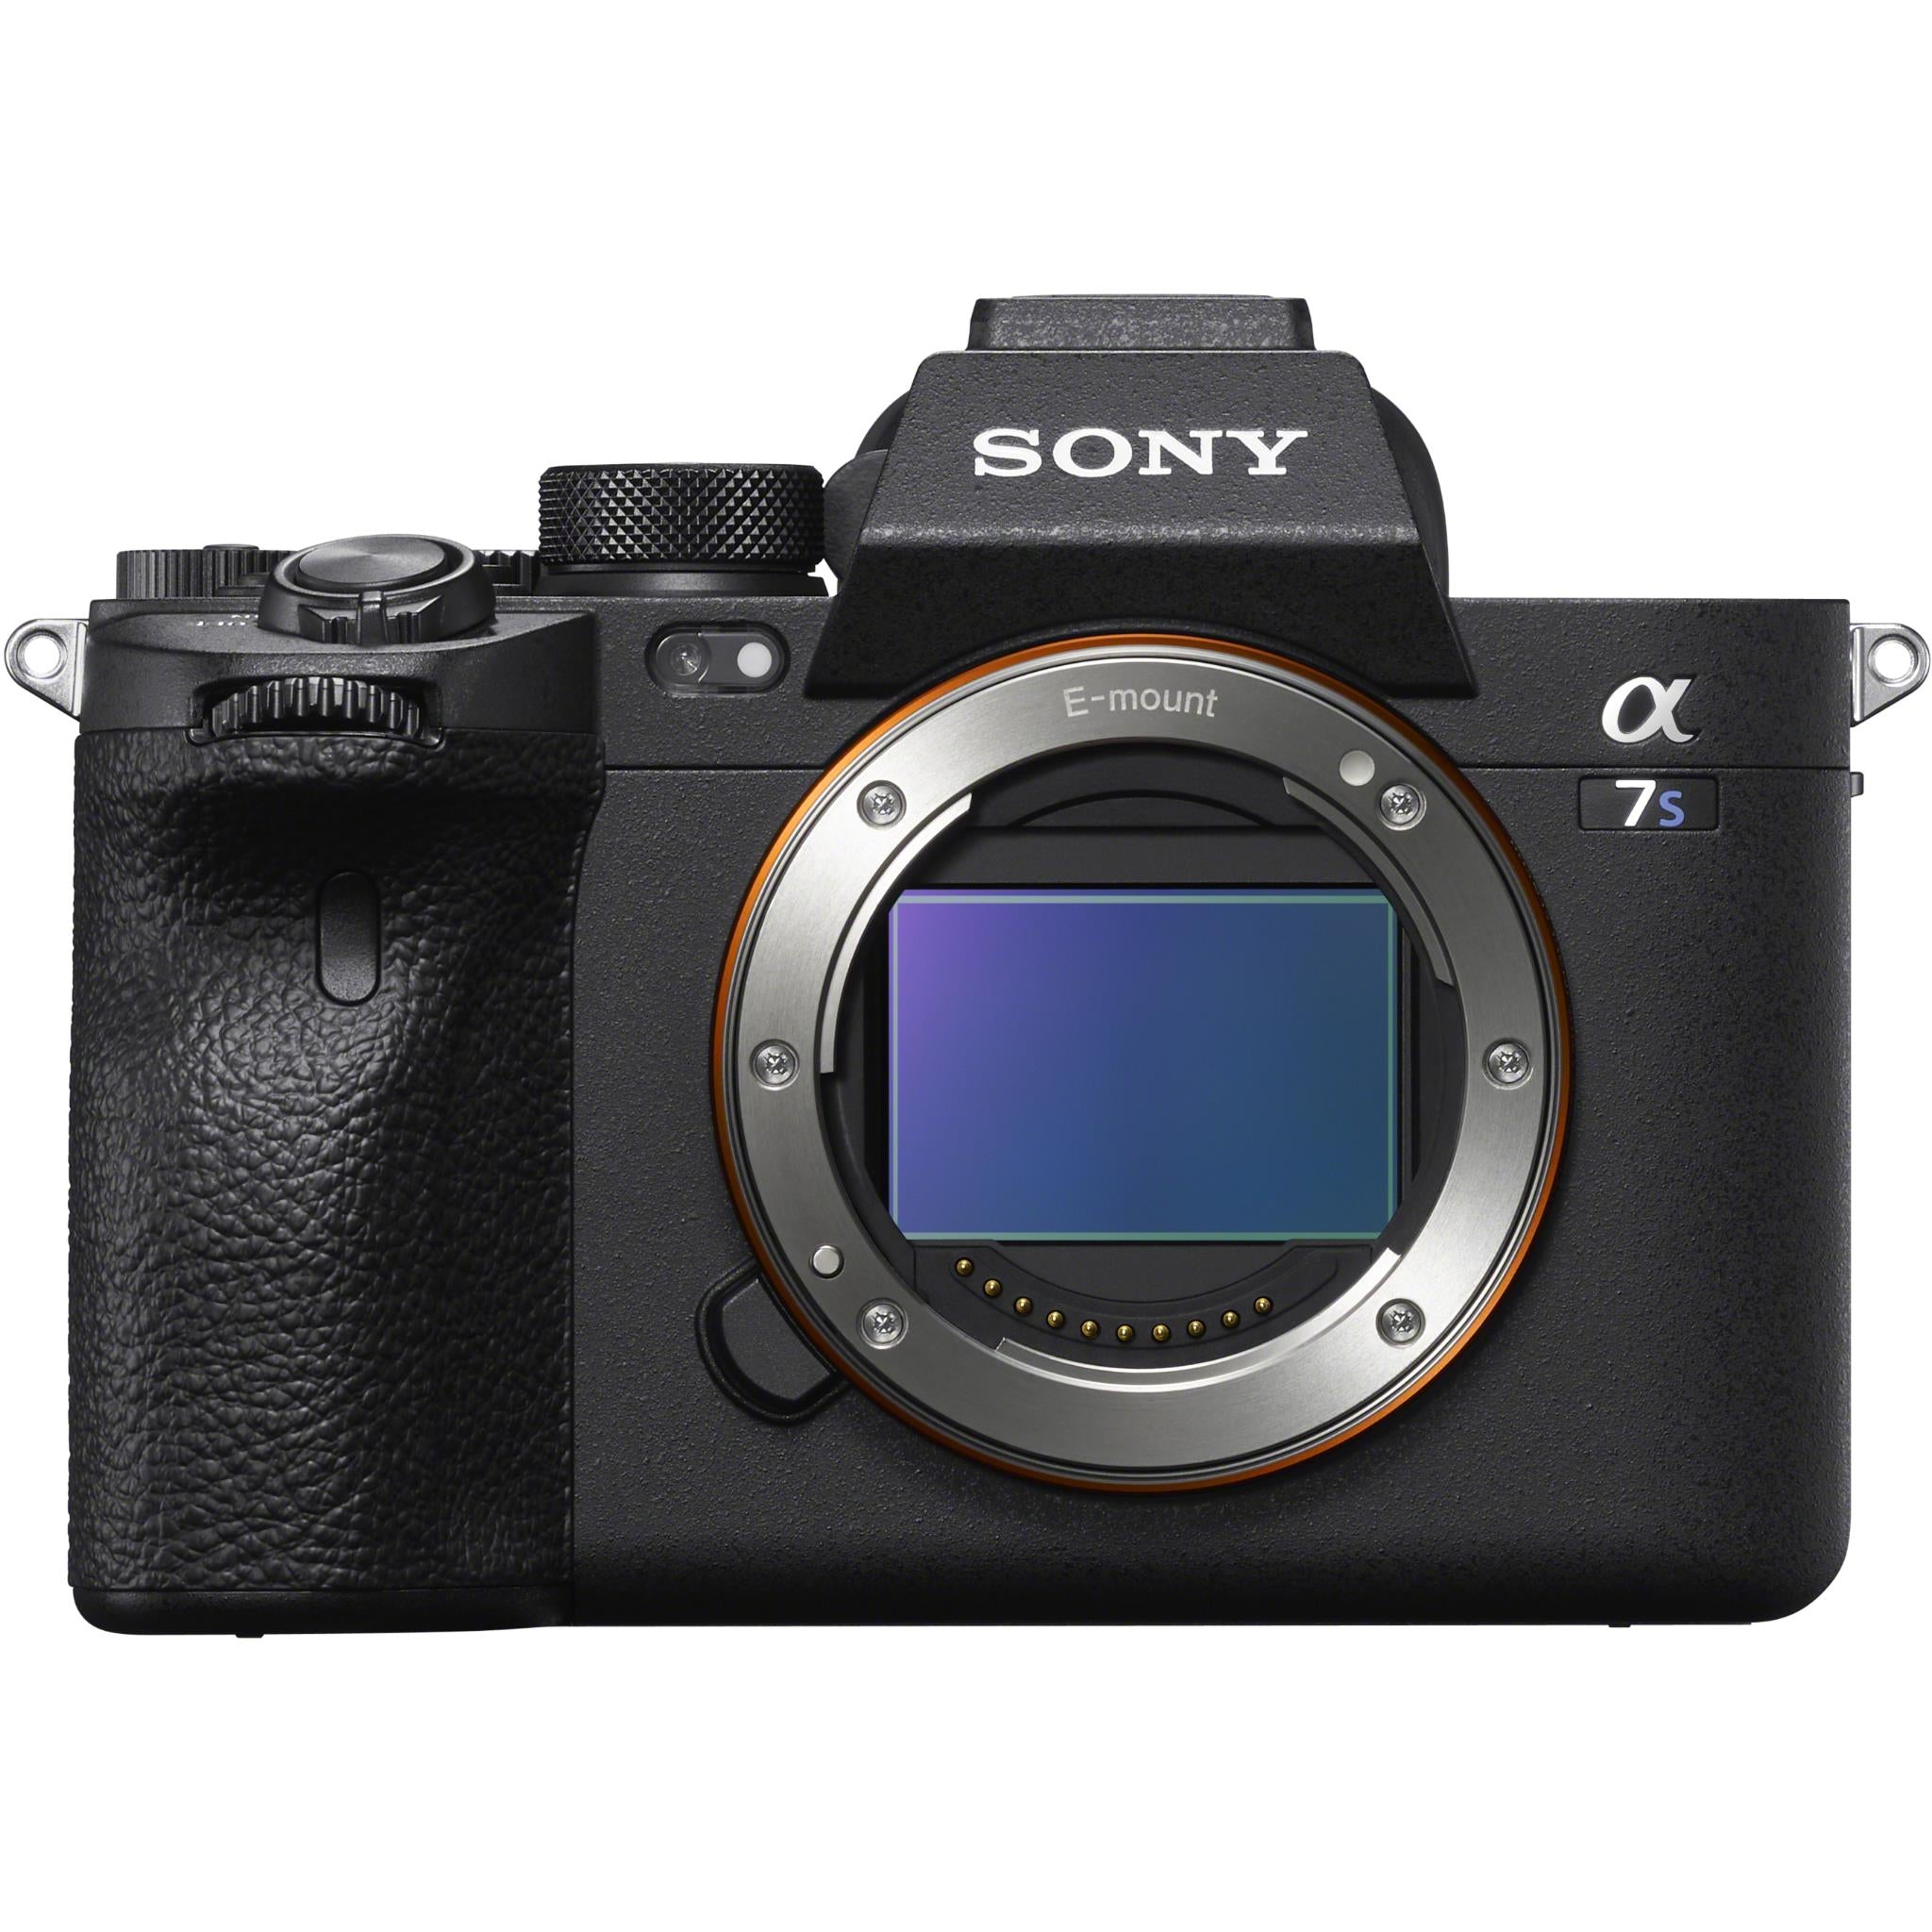 sony alpha a7s iii full frame mirrorless camera (body only)